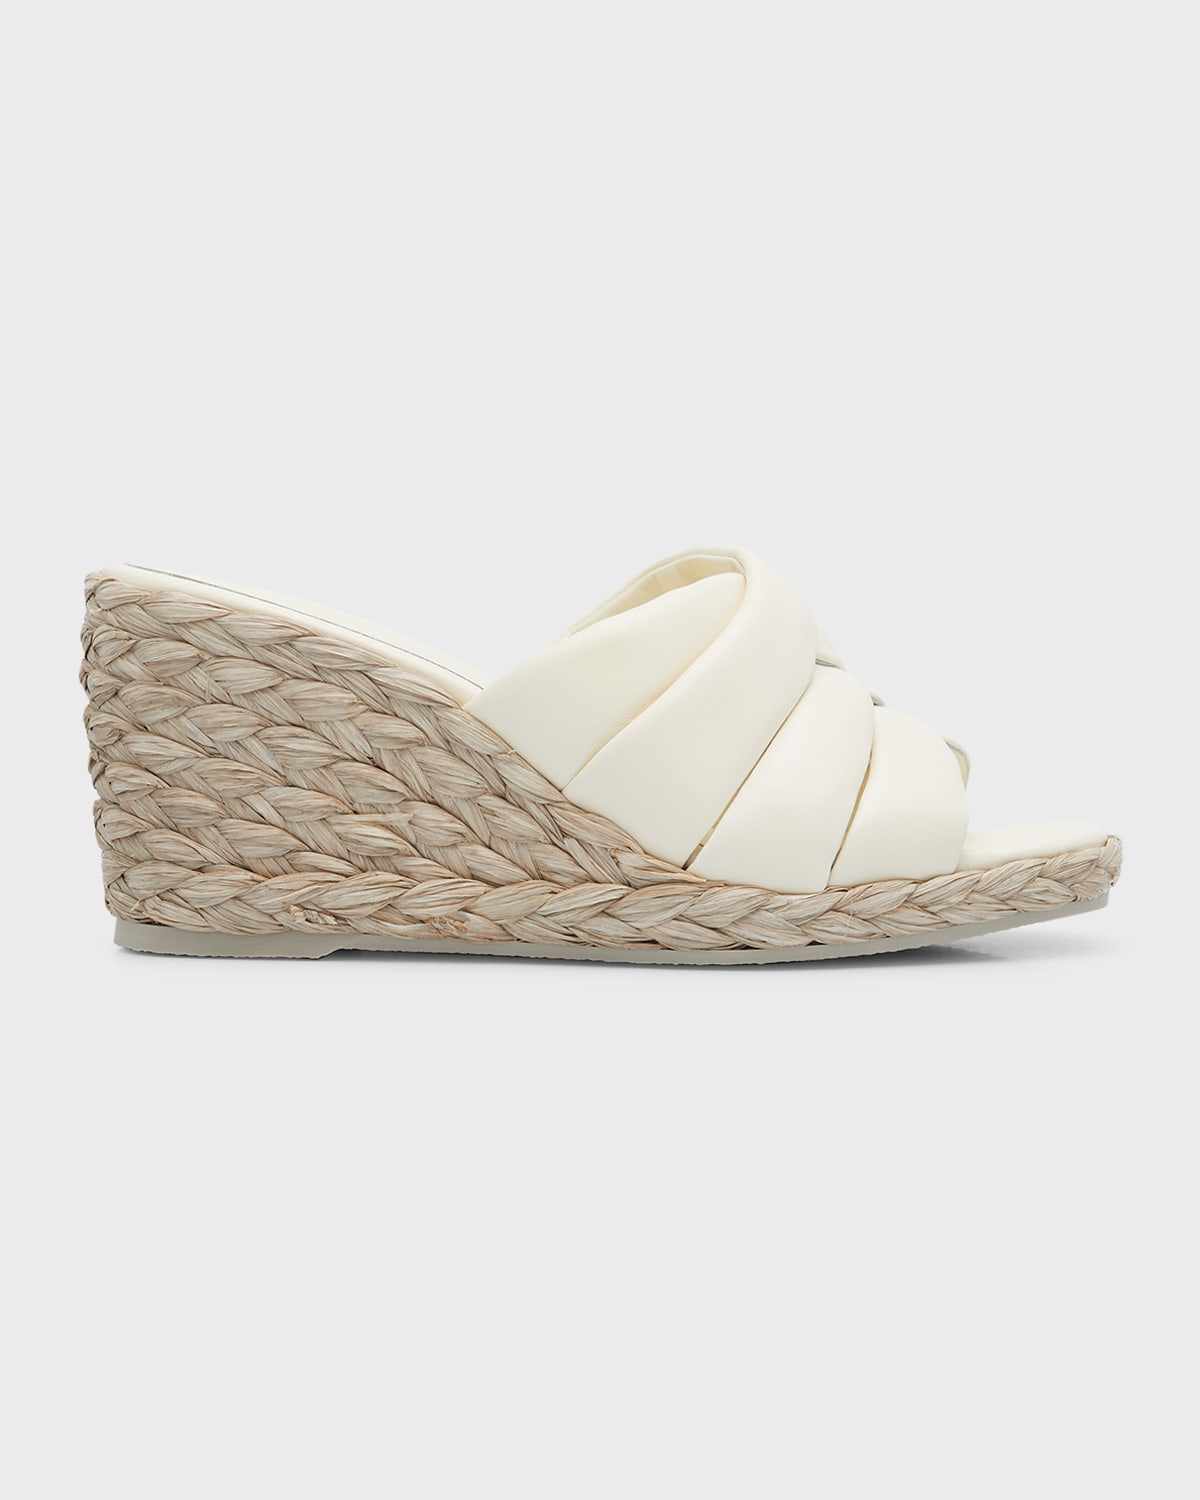 VINCE GILIAN LEATHER ESPADRILLE WEDGE SANDALS